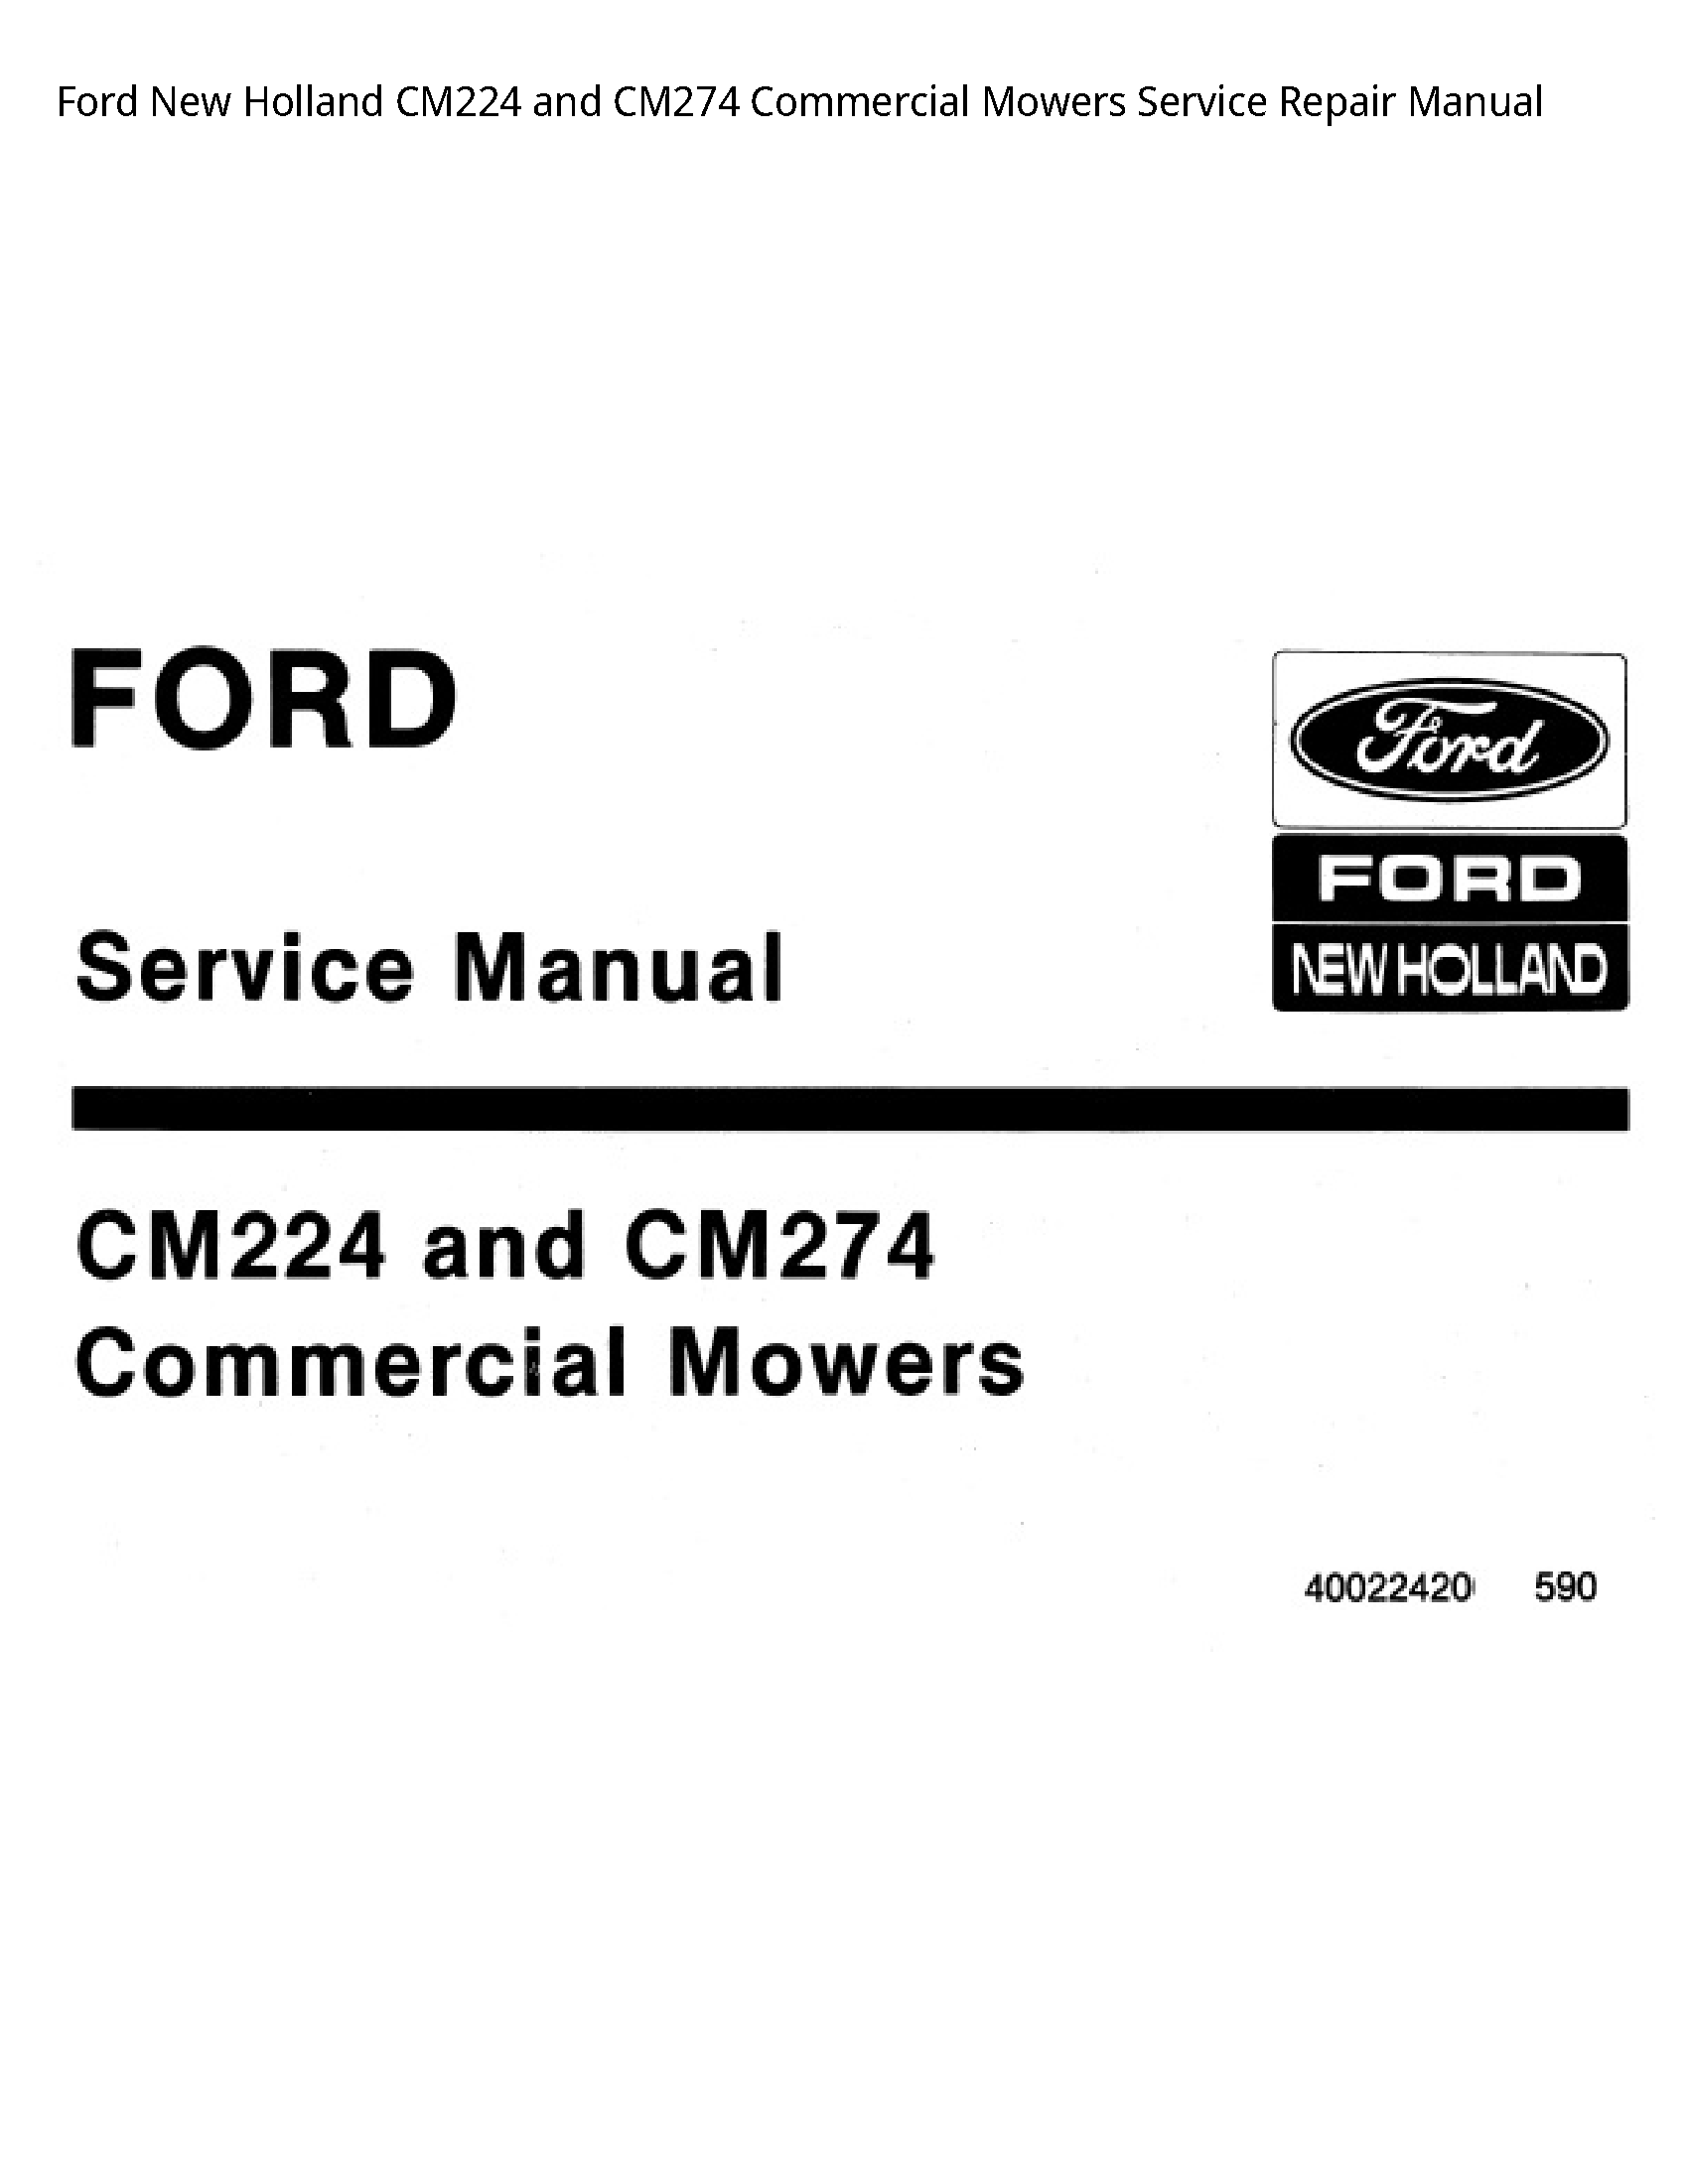  CM224  Commercial Mowers manual